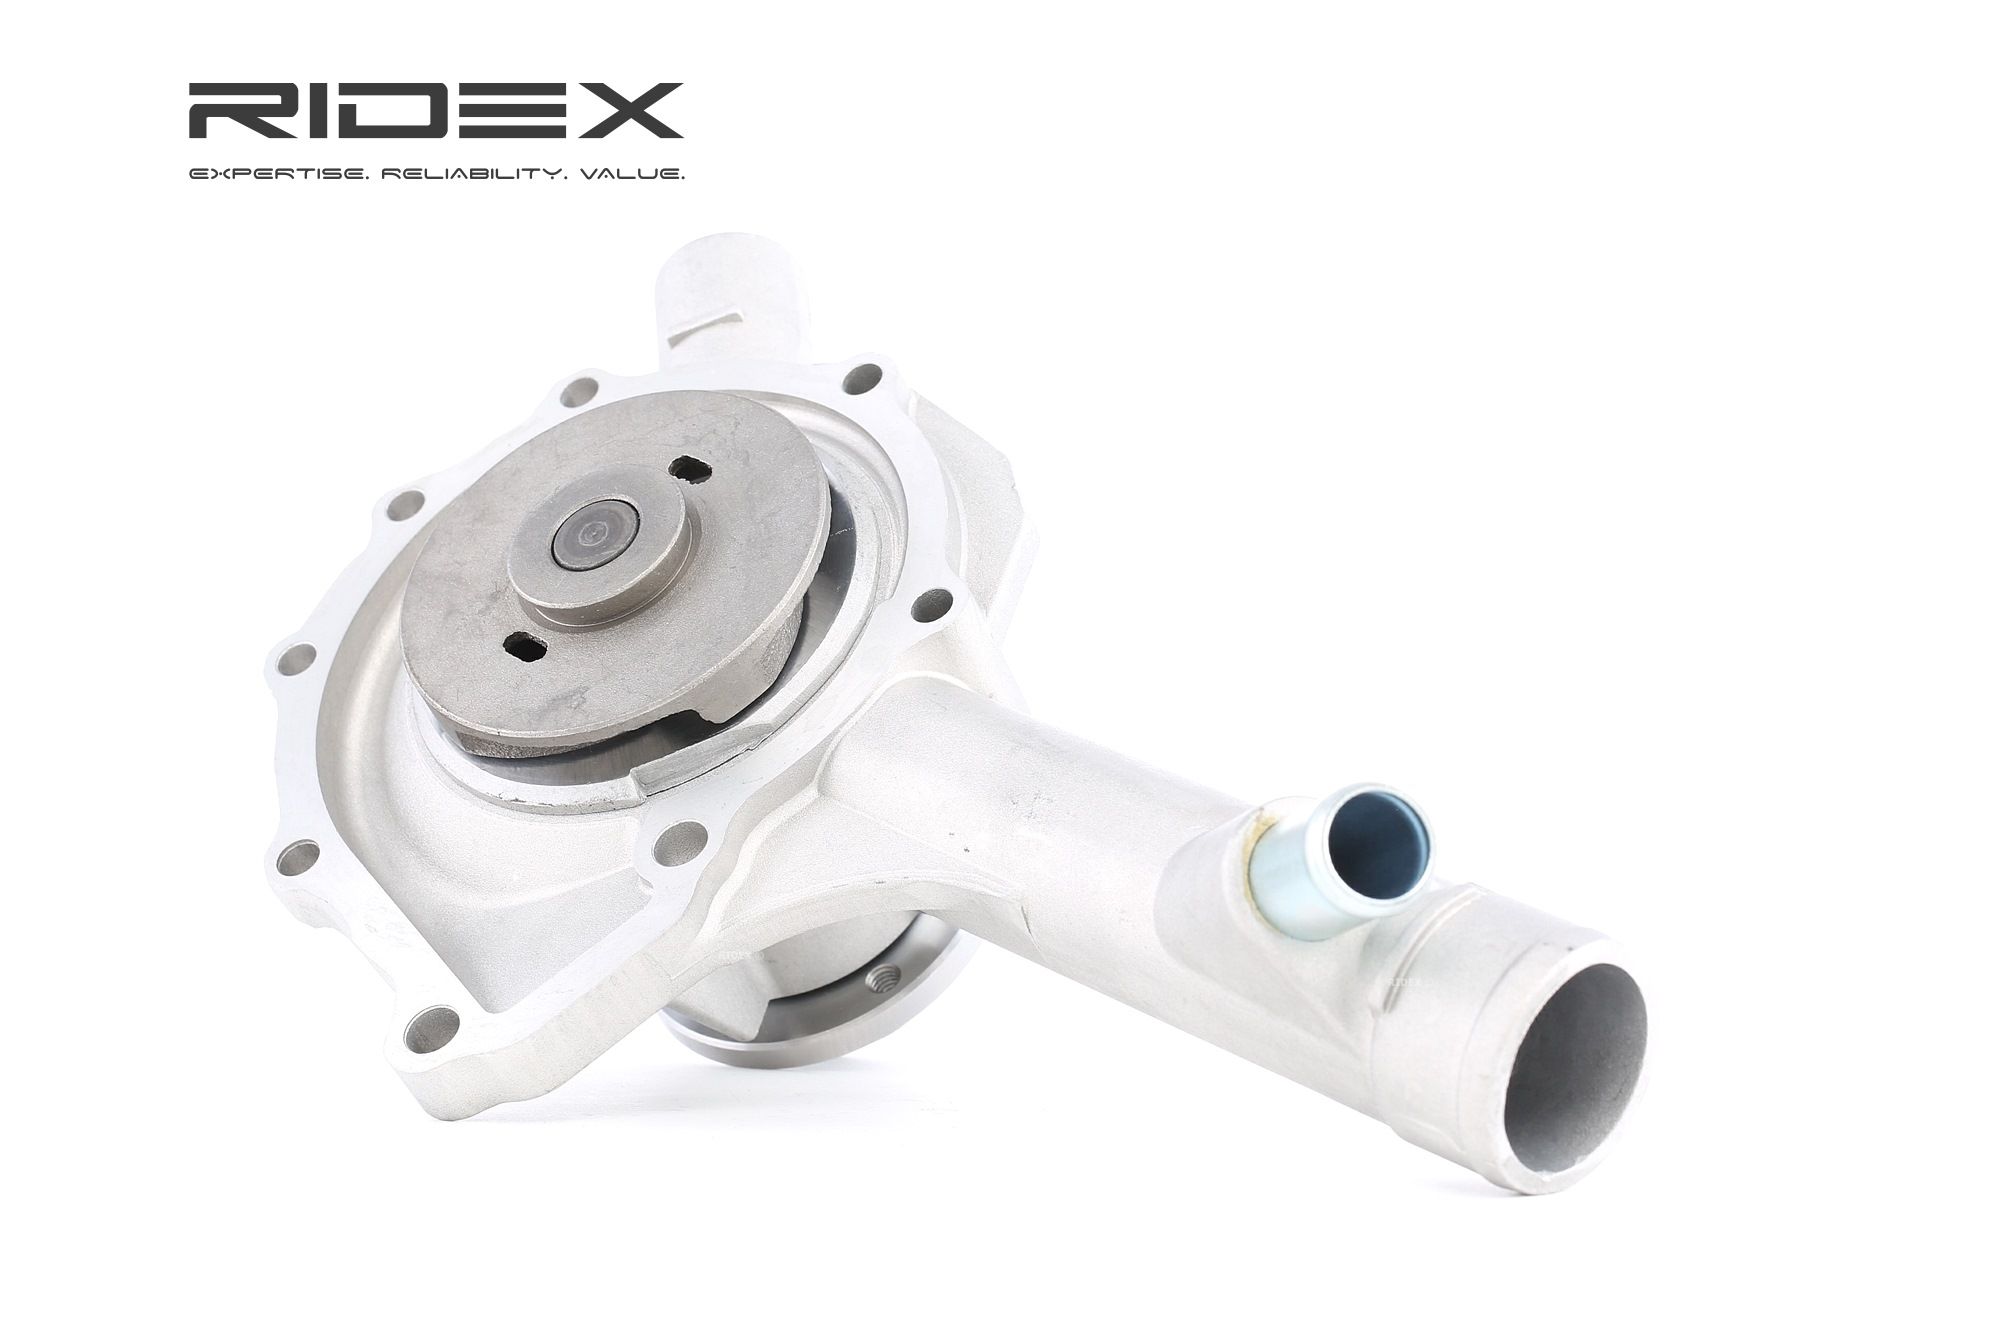 RIDEX Cast Aluminium, without belt pulley, with seal, with flange, Mechanical, Metal impeller Water pumps 1260W0010 buy